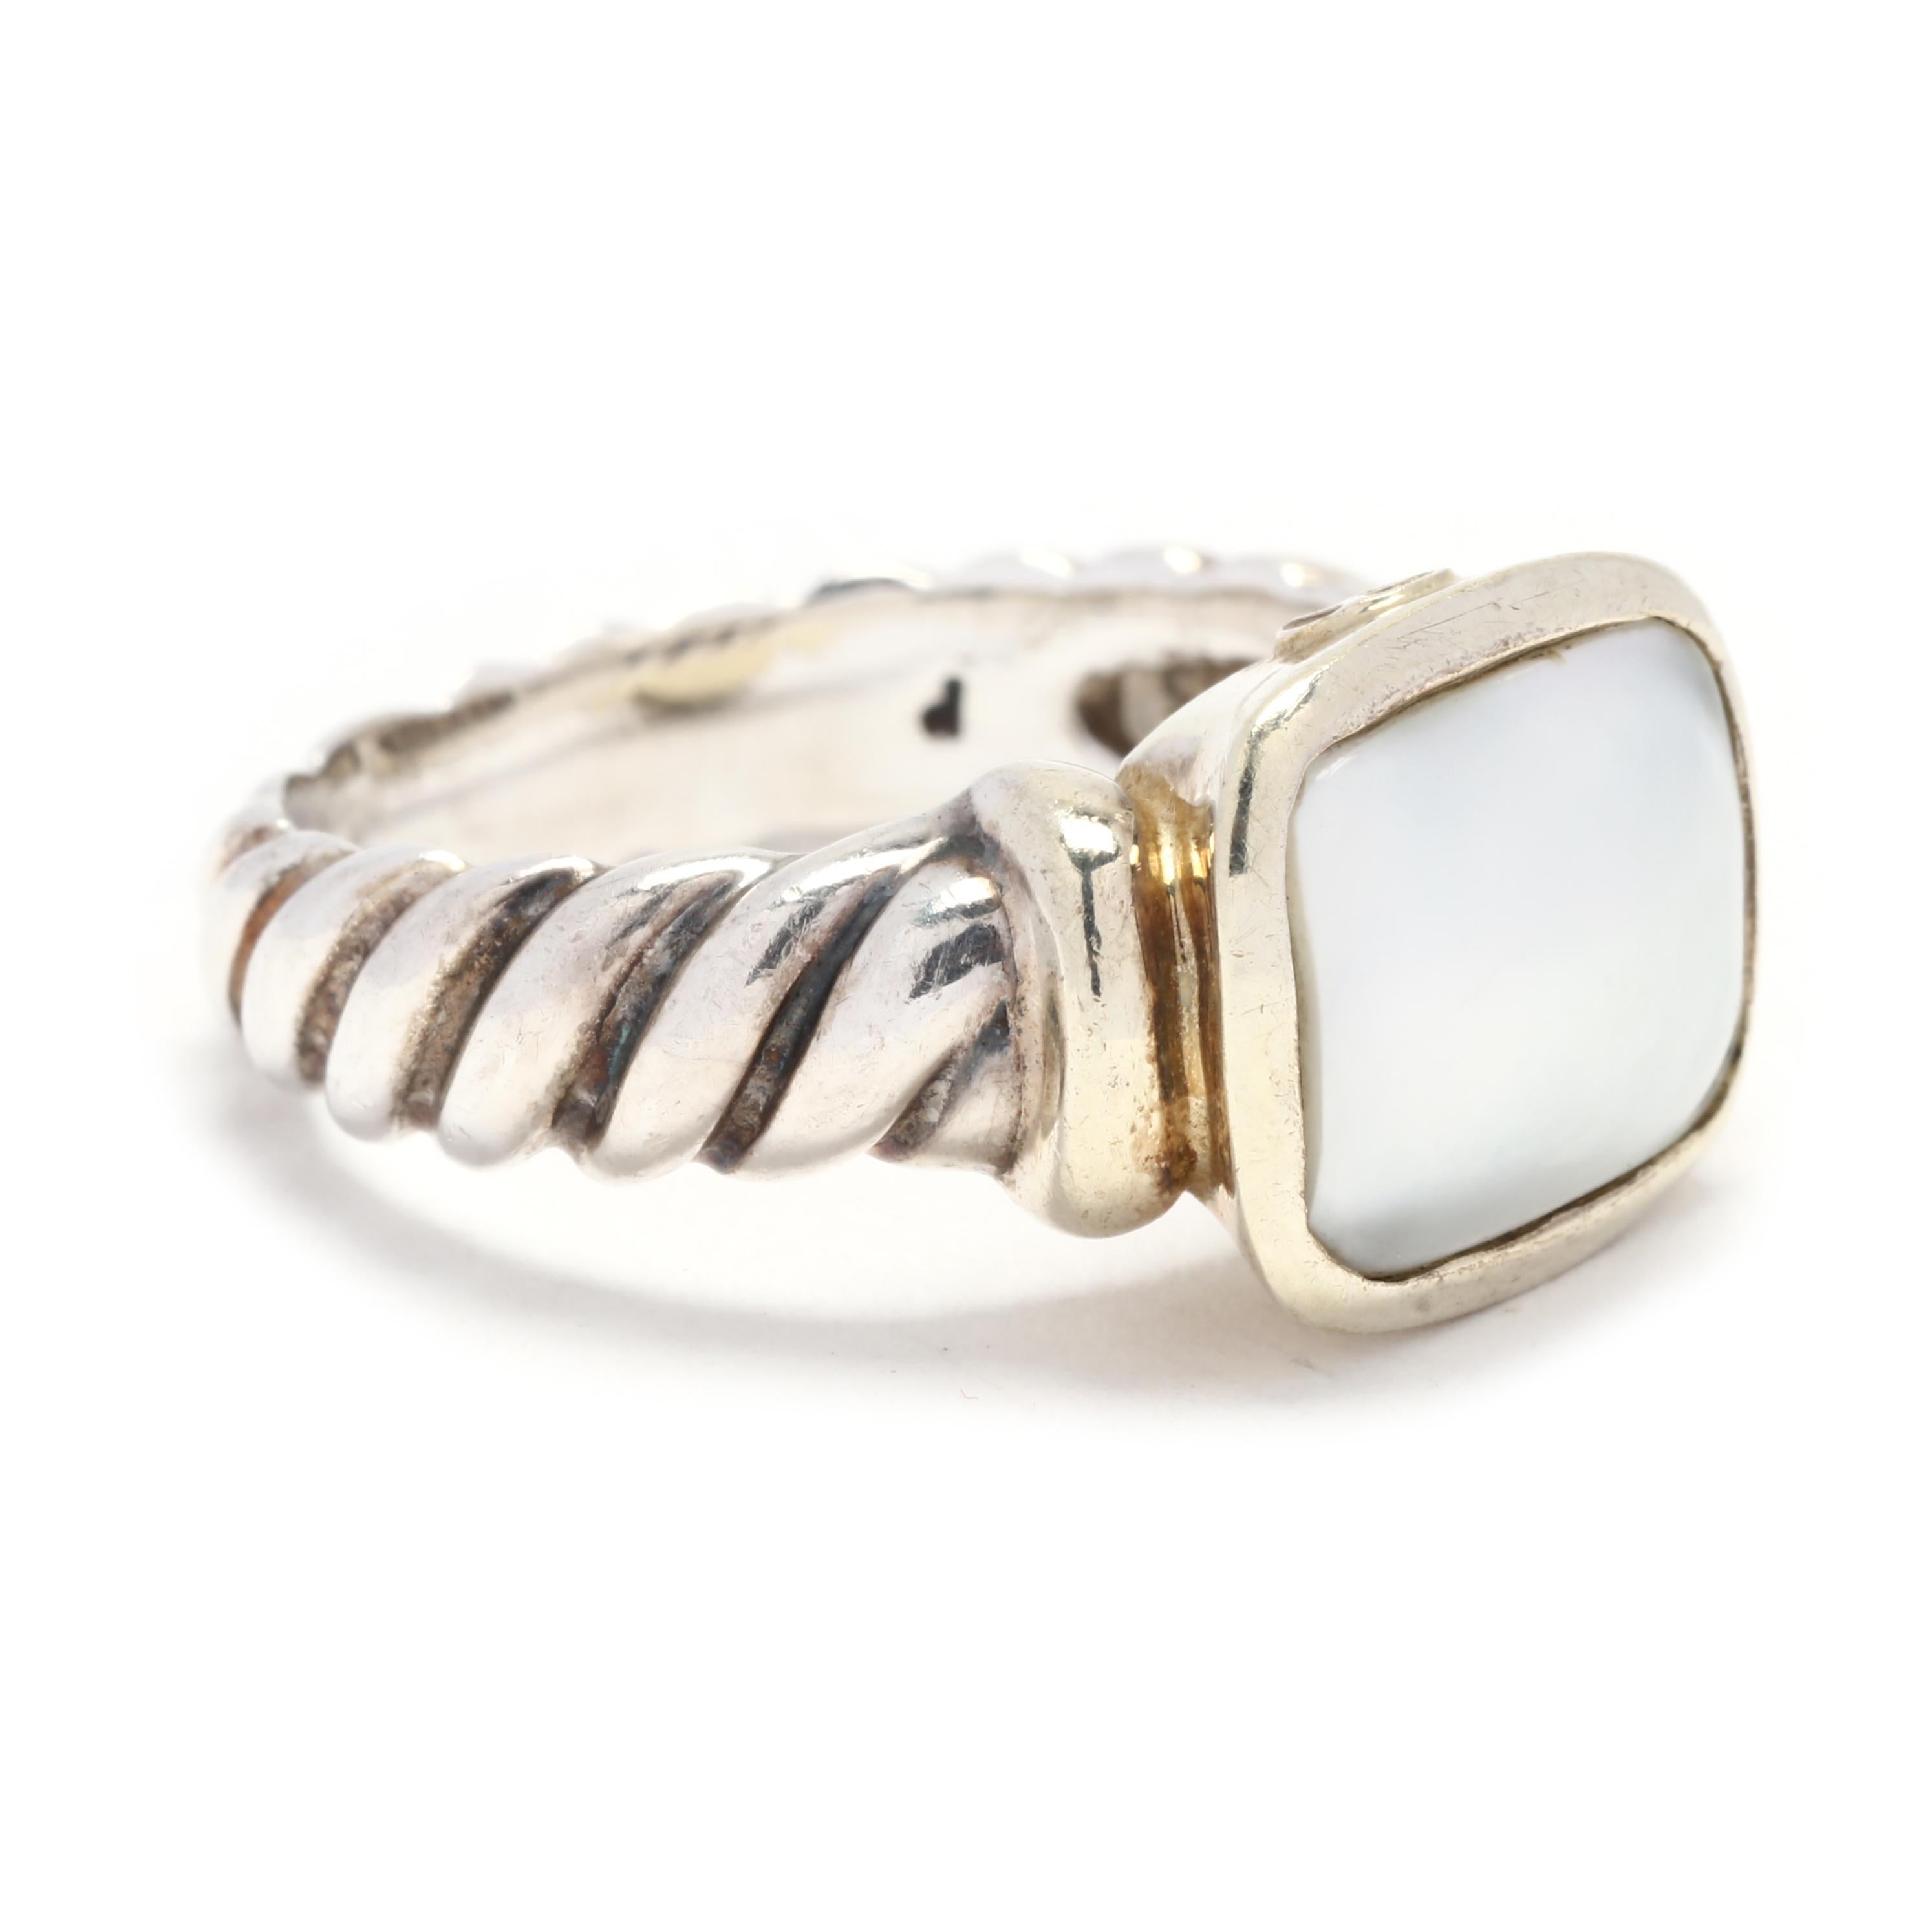 This David Yurman Mabé Pearl Noblesse Ring is a stunning and elegant piece of jewelry. Made from 14K yellow gold and sterling silver, it combines luxurious materials to create a beautiful look. The ring features a large mabé pearl in the center,